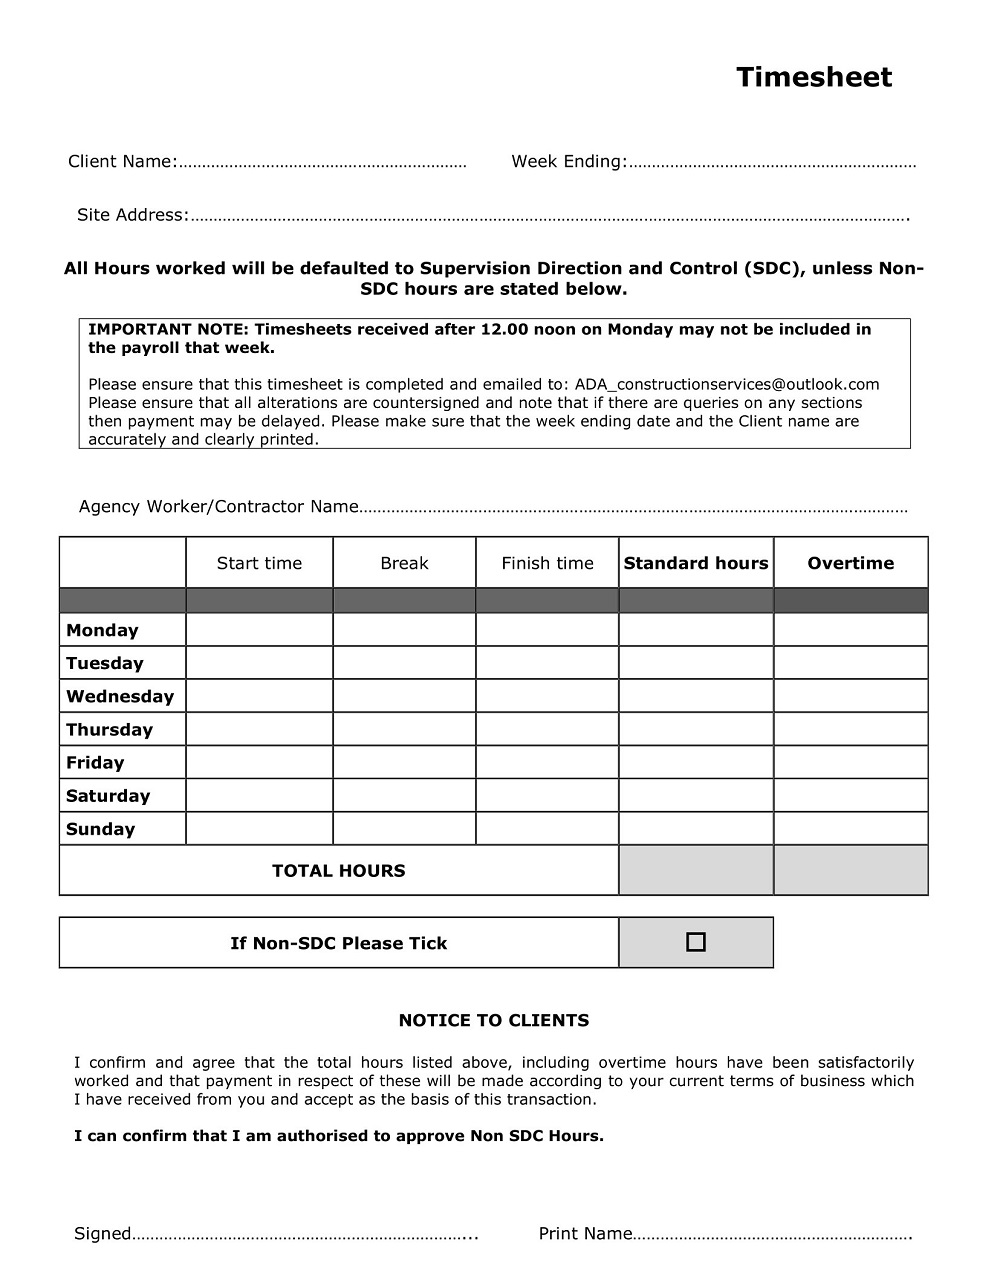 Construction Services Timesheet Template